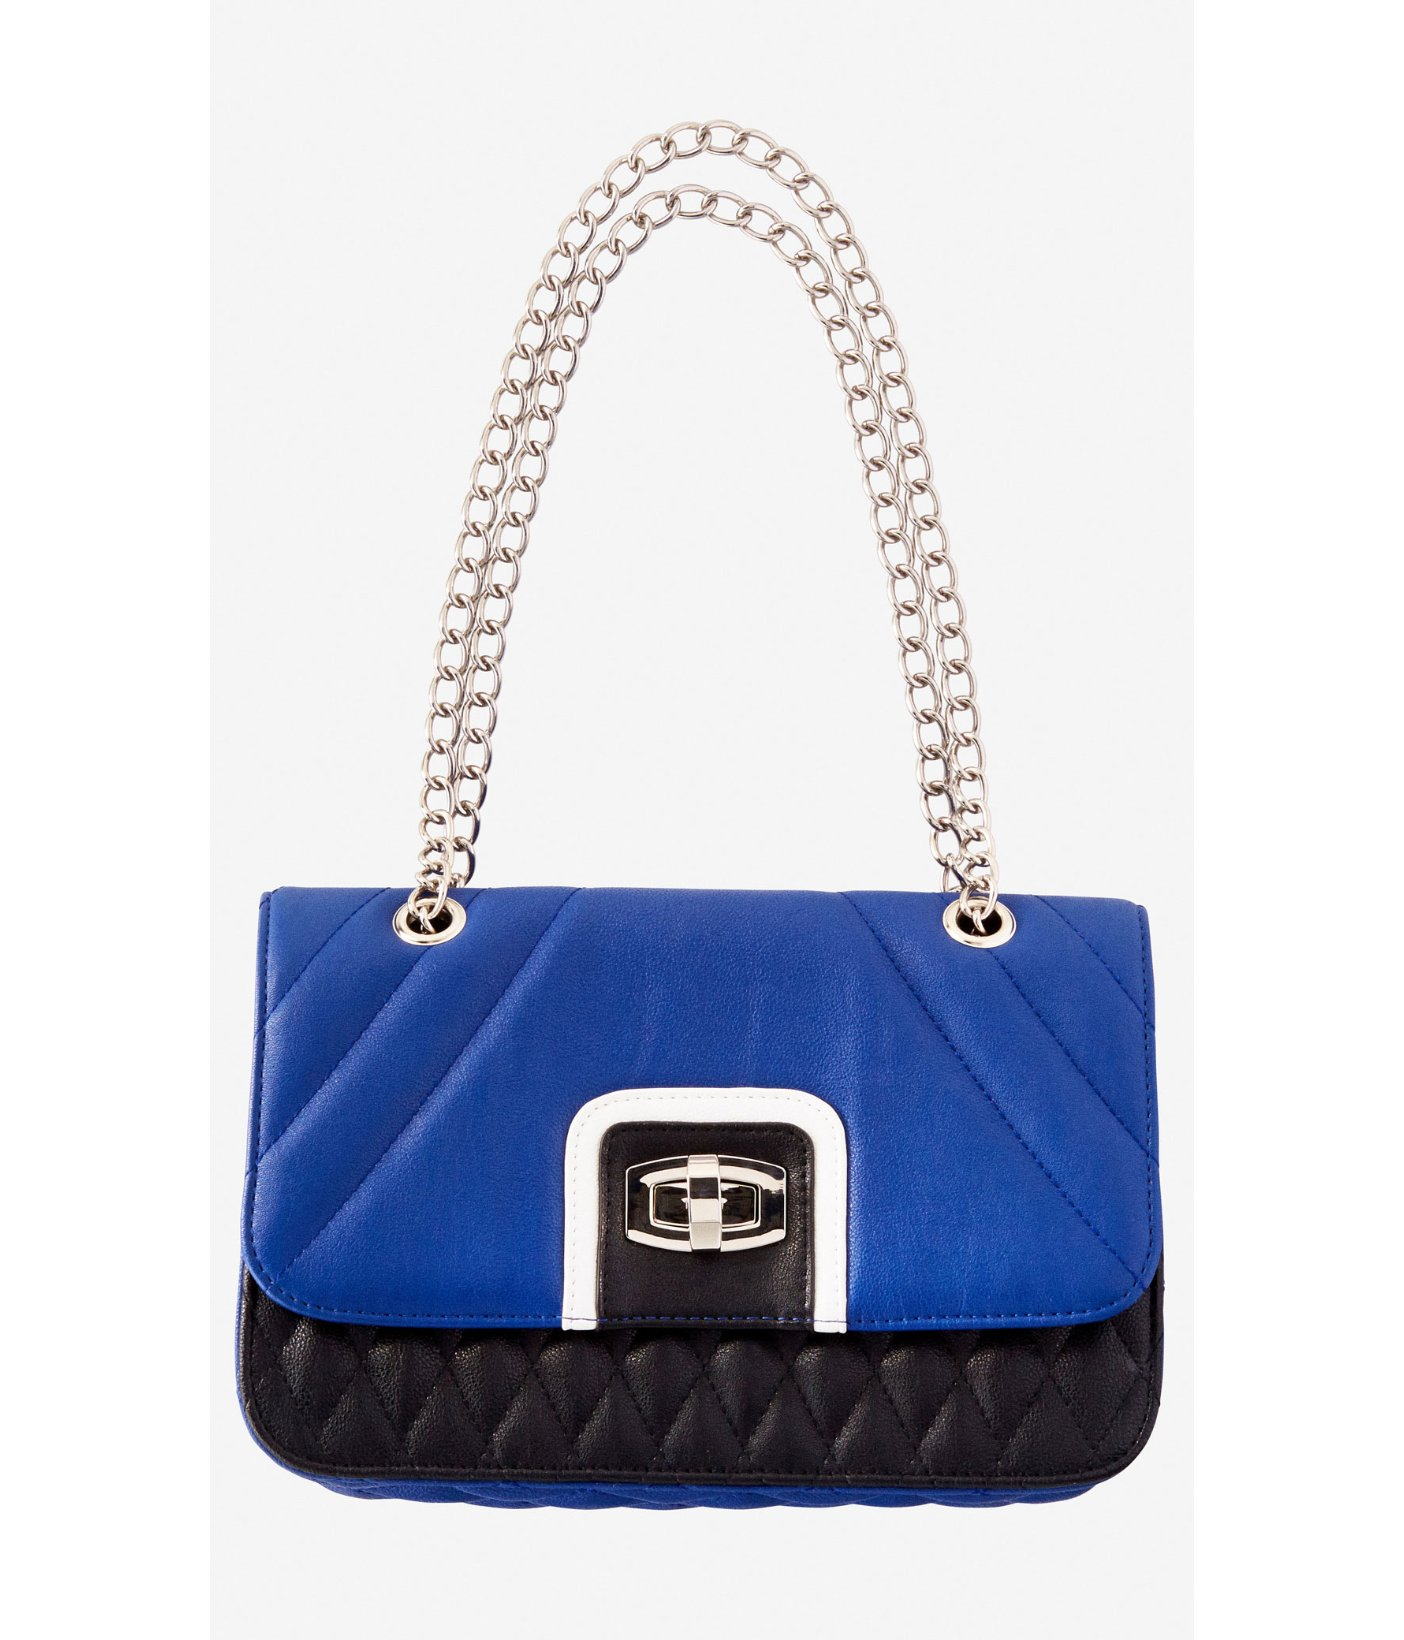 Express Linear Quilted Chain Strap Shoulder Bag in Blue | Lyst